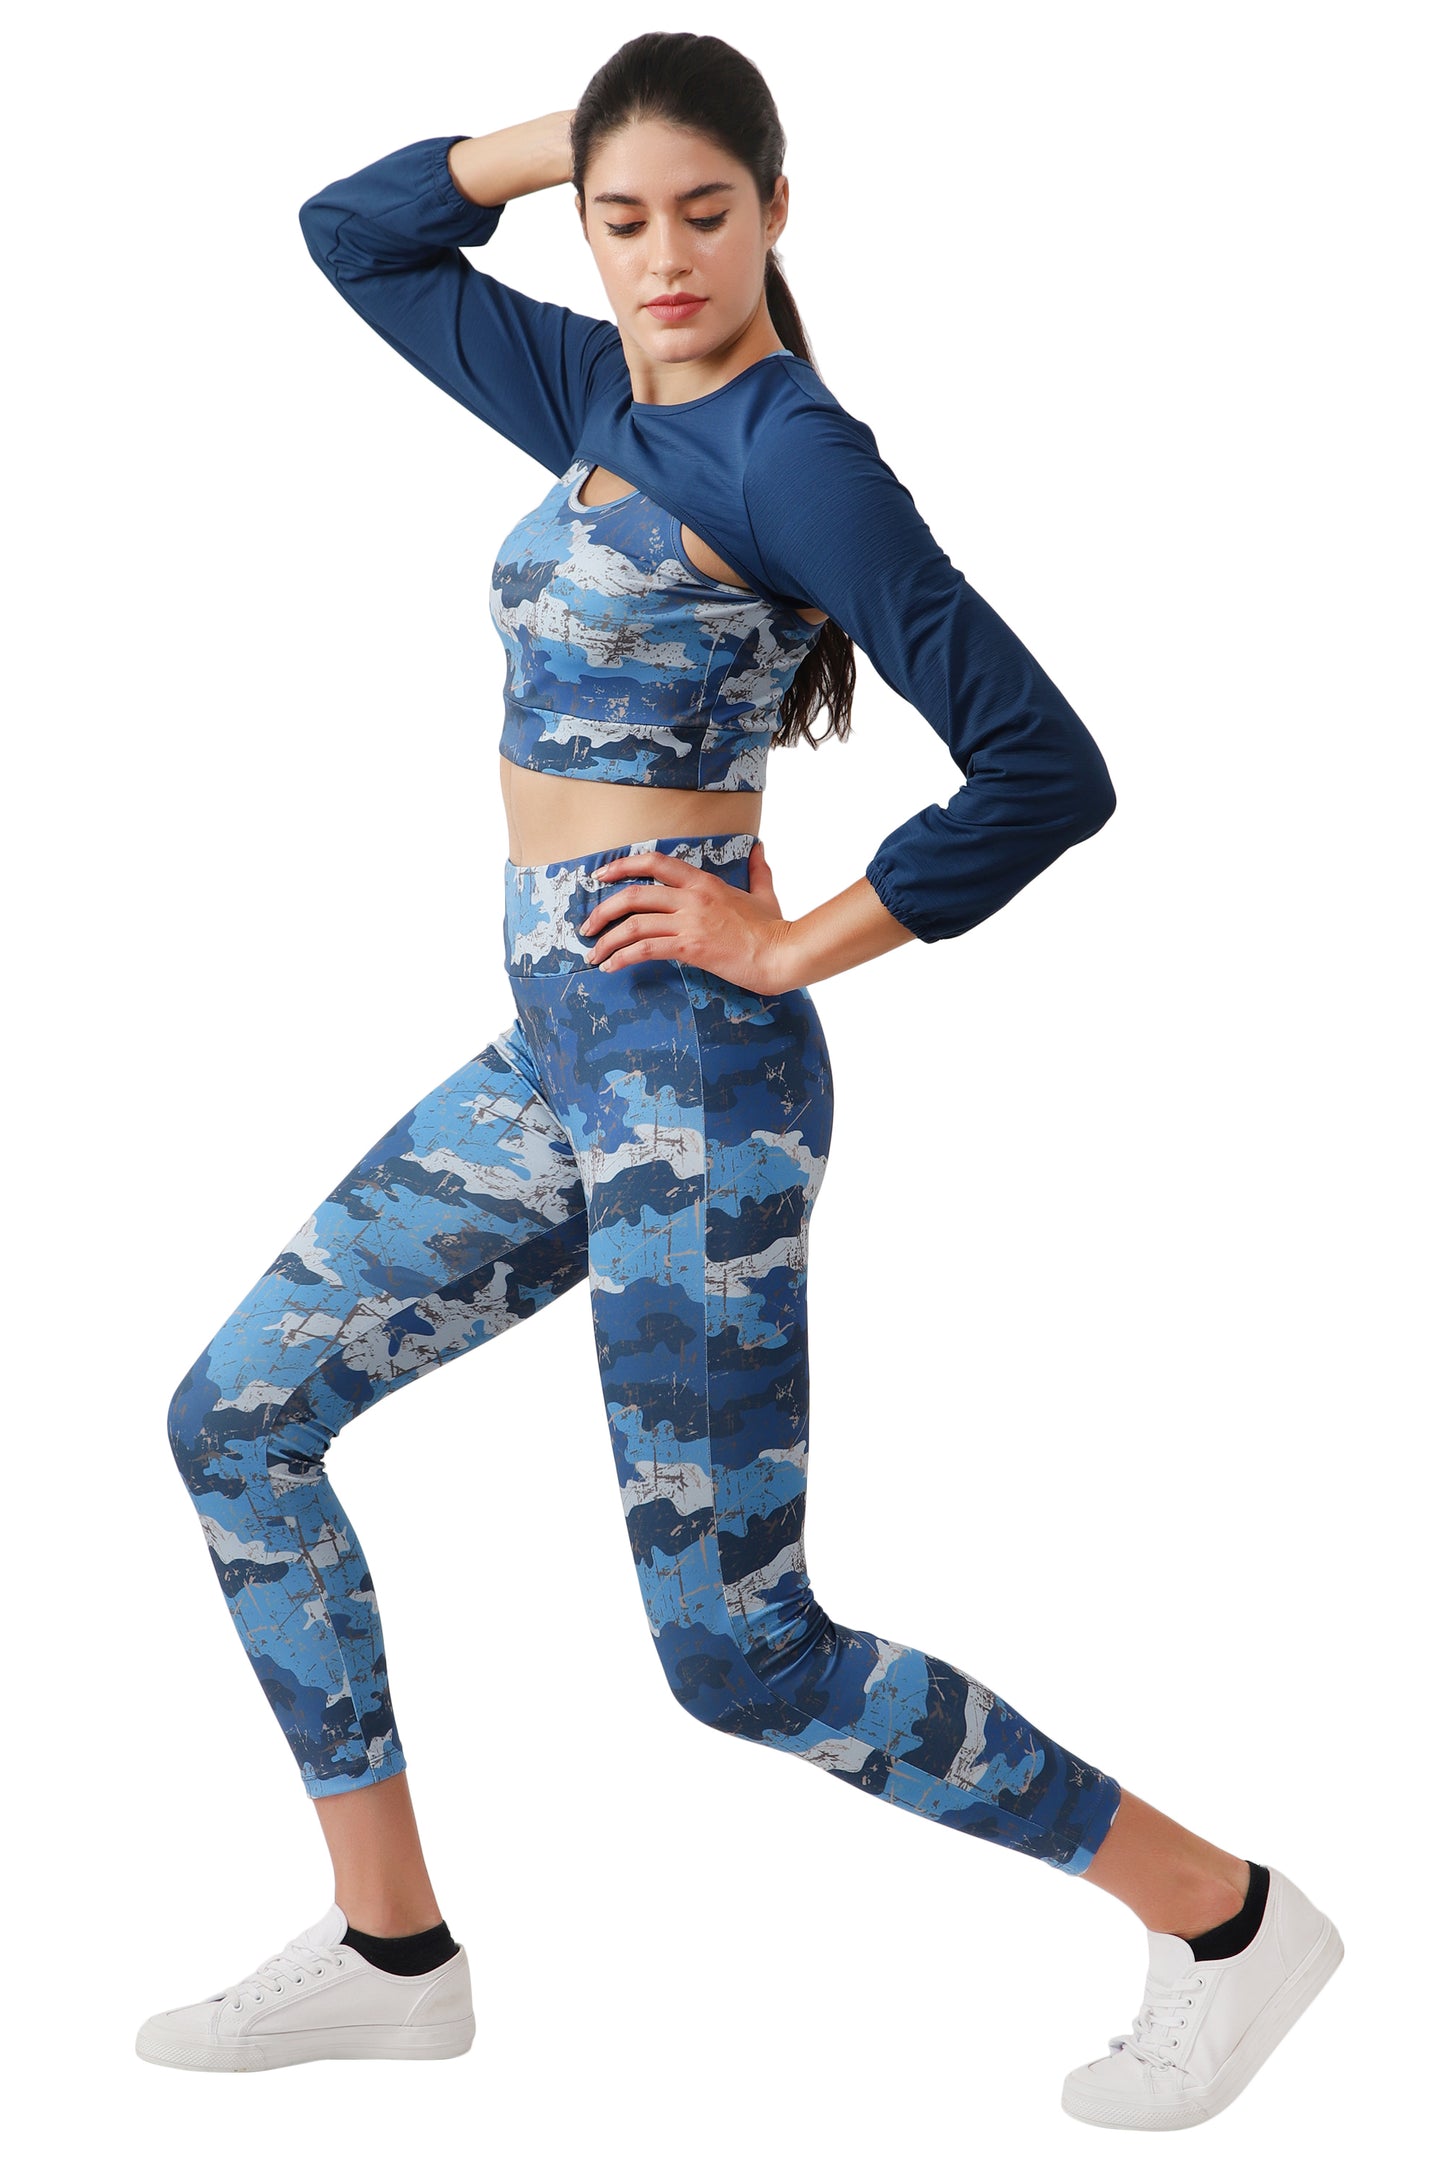 NUEVOSDAMAS BLUE CAMOUFLAGE PRINT DRY FIT FABRIC PADDED BRA TOP WITH ATTACHED FULL SLEEVE YOKE AND TRACK PANT - 3 PCS SET